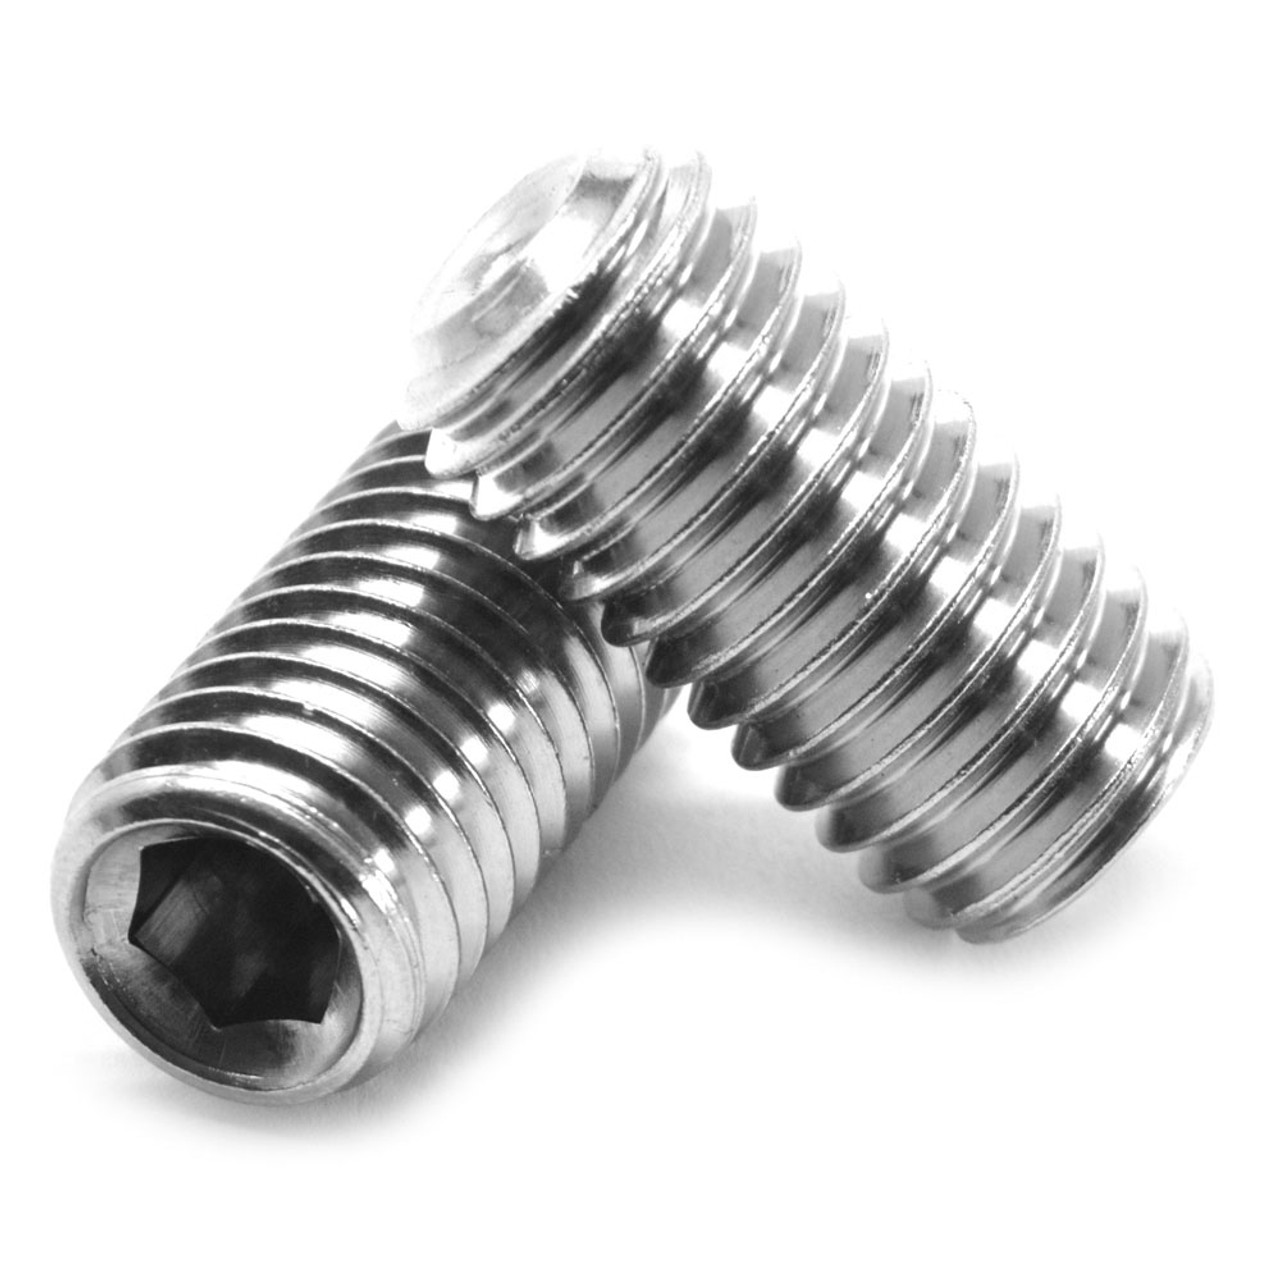 #10-24 x 7/16" Coarse Thread Socket Set Screw Cup Point Stainless Steel 18-8